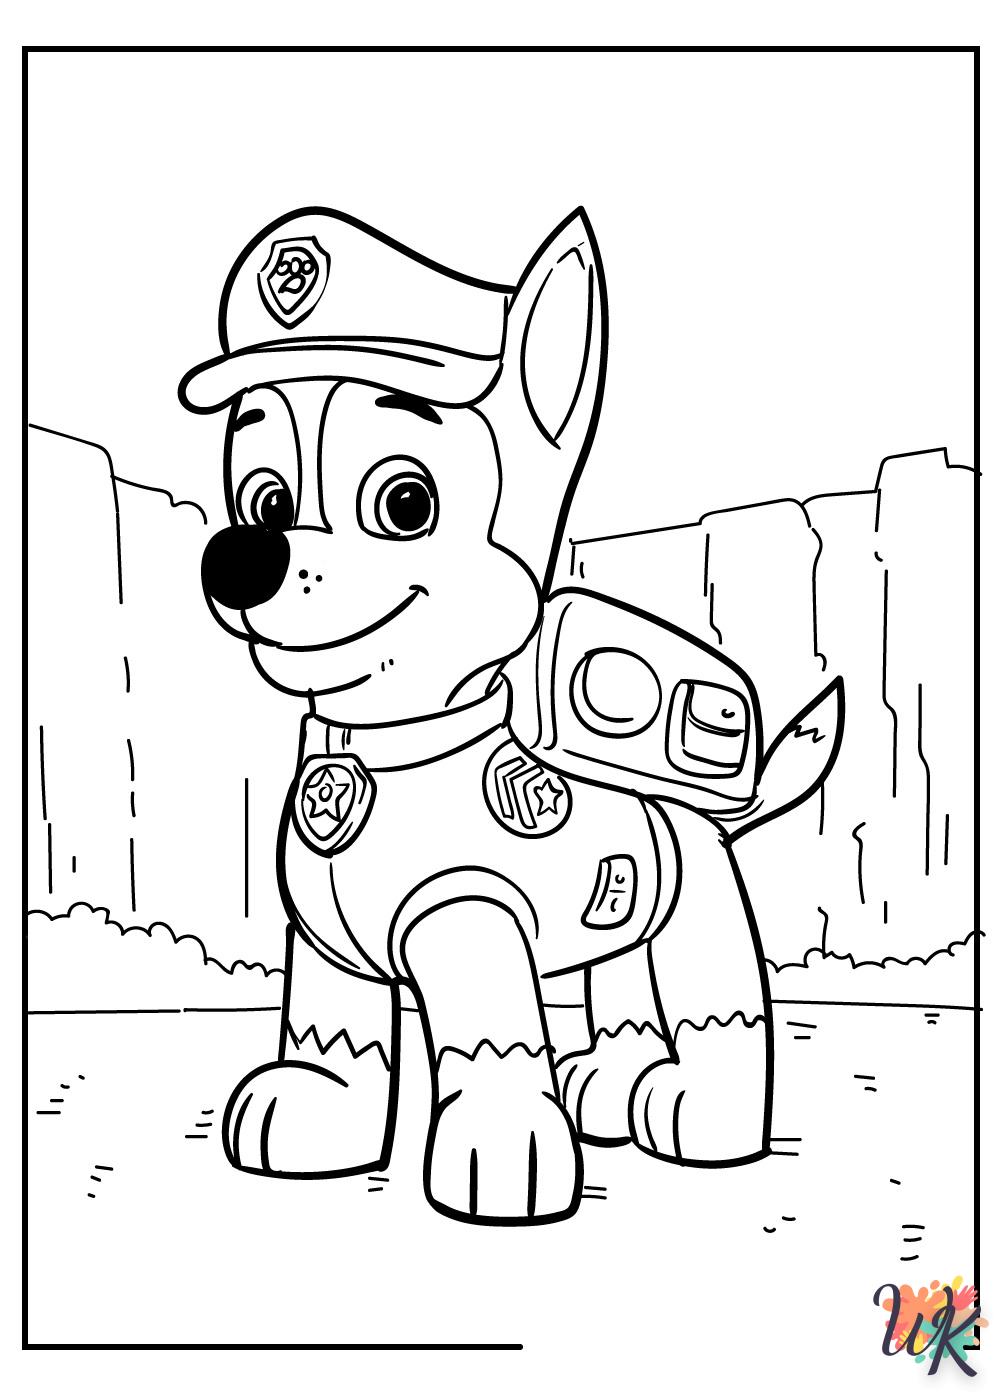 printable Paw Patrol coloring pages